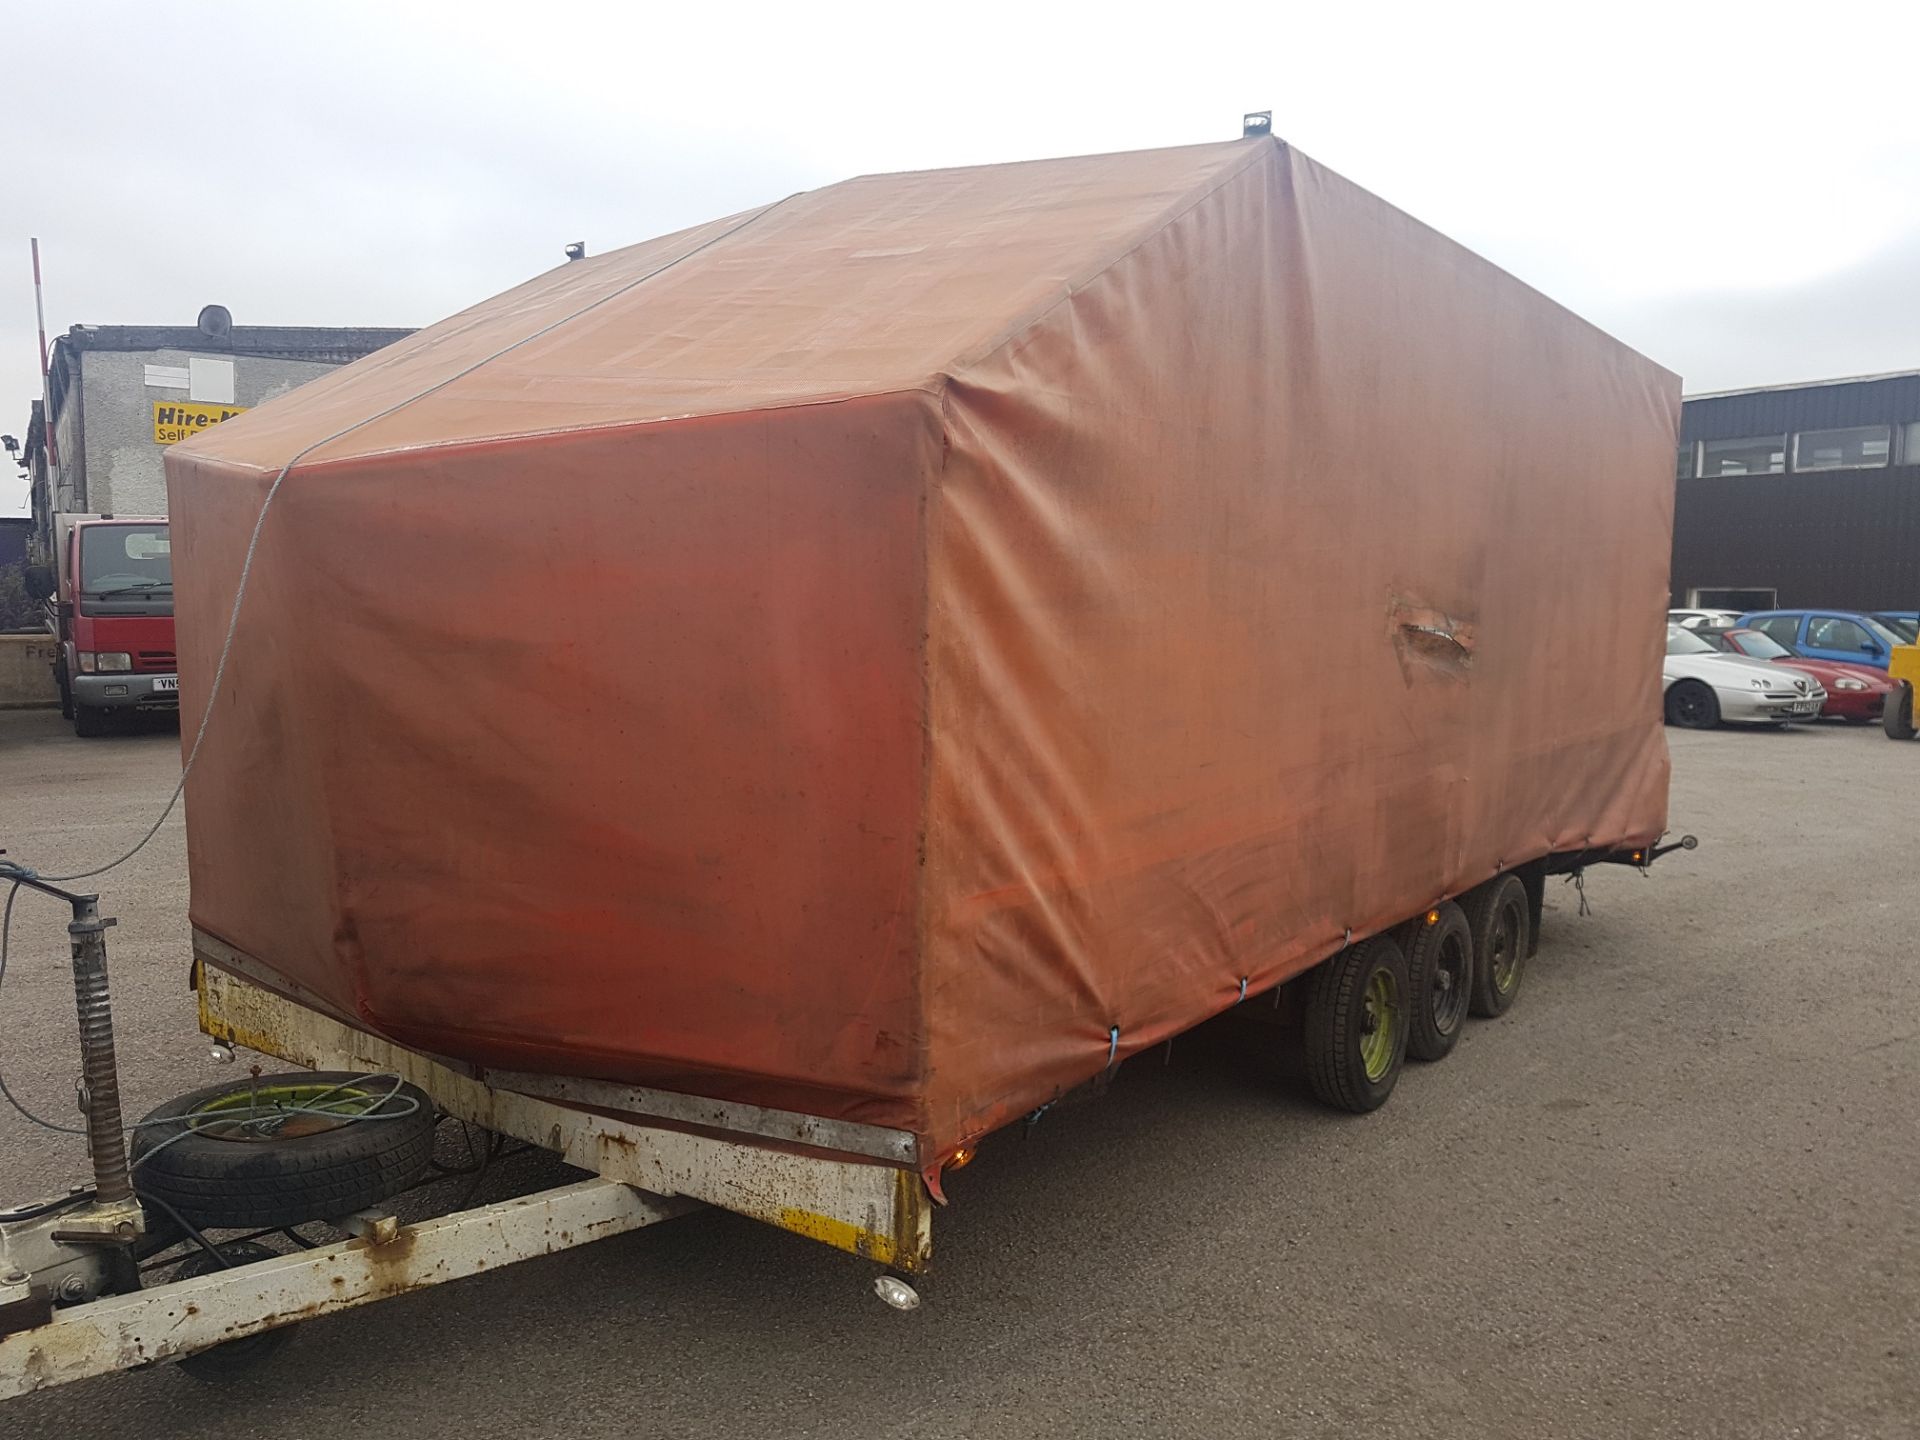 TRI-AXLE BEAVER-TAIL CAR TRANSPORTER COVERED TRAILER - 5.5 METRE BED LENGTH! *PLUS VAT* - Image 3 of 13